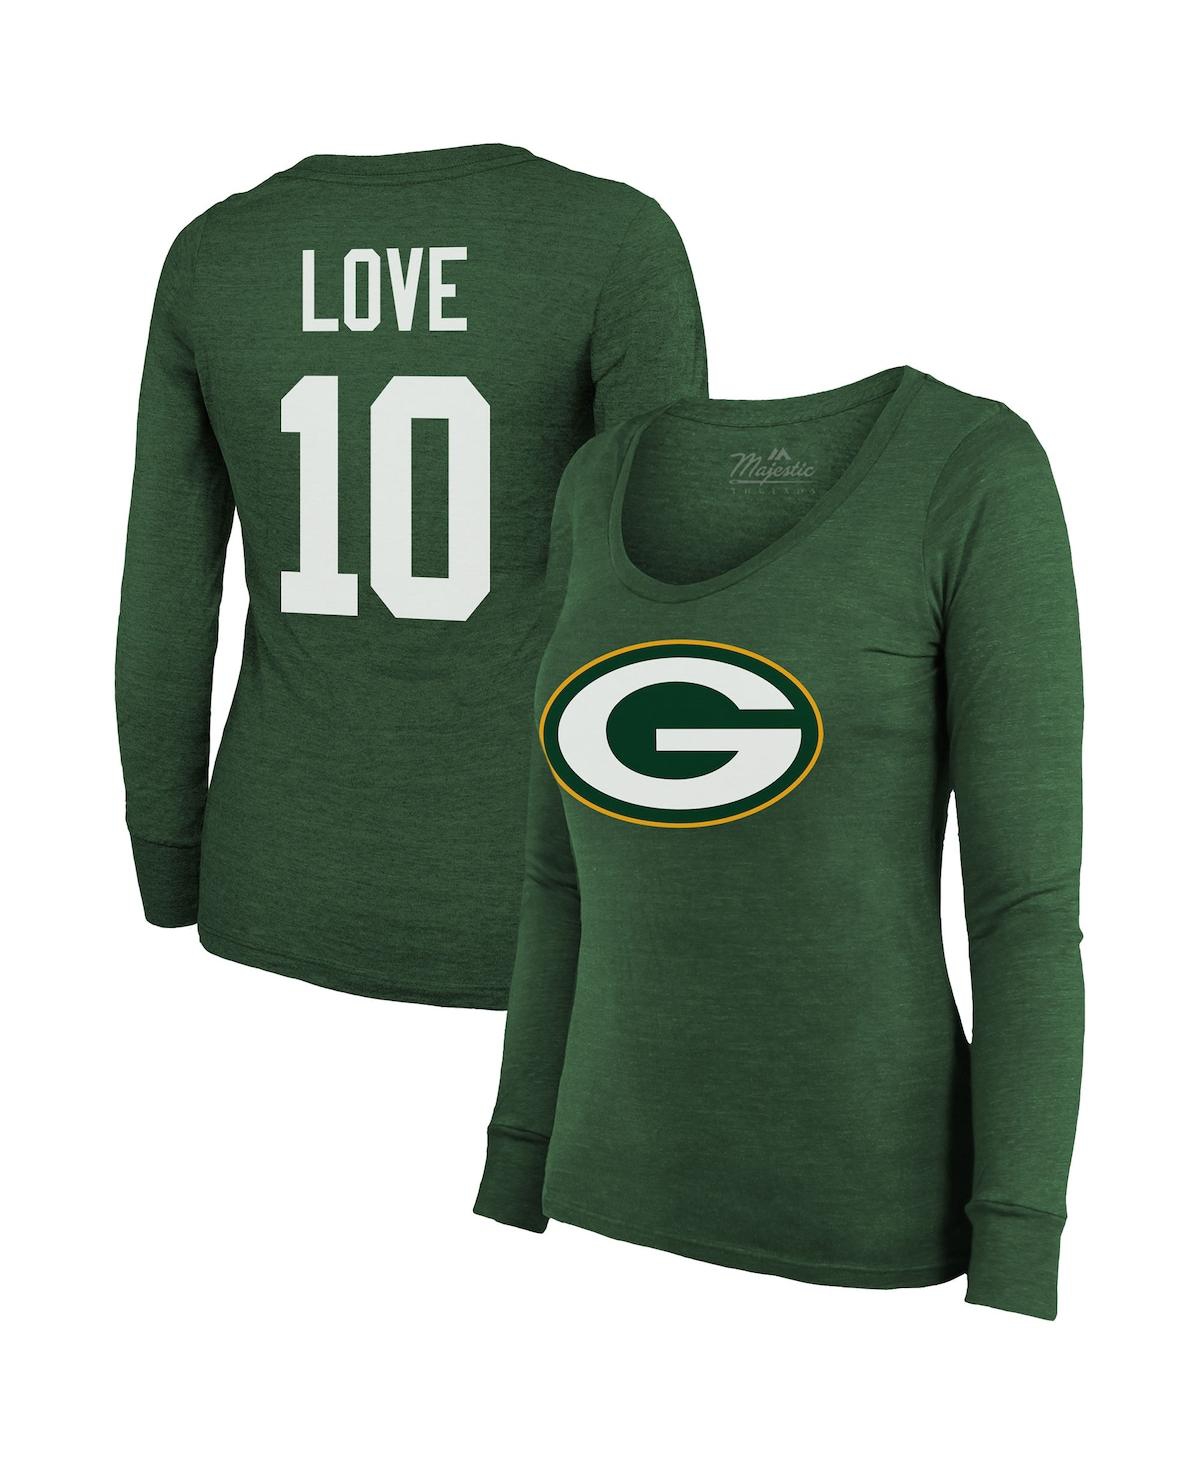 Women's Majestic Threads Jordan Love Green Green Bay Packers Name and Number Long Sleeve Scoop Neck Tri-Blend T-shirt - Green